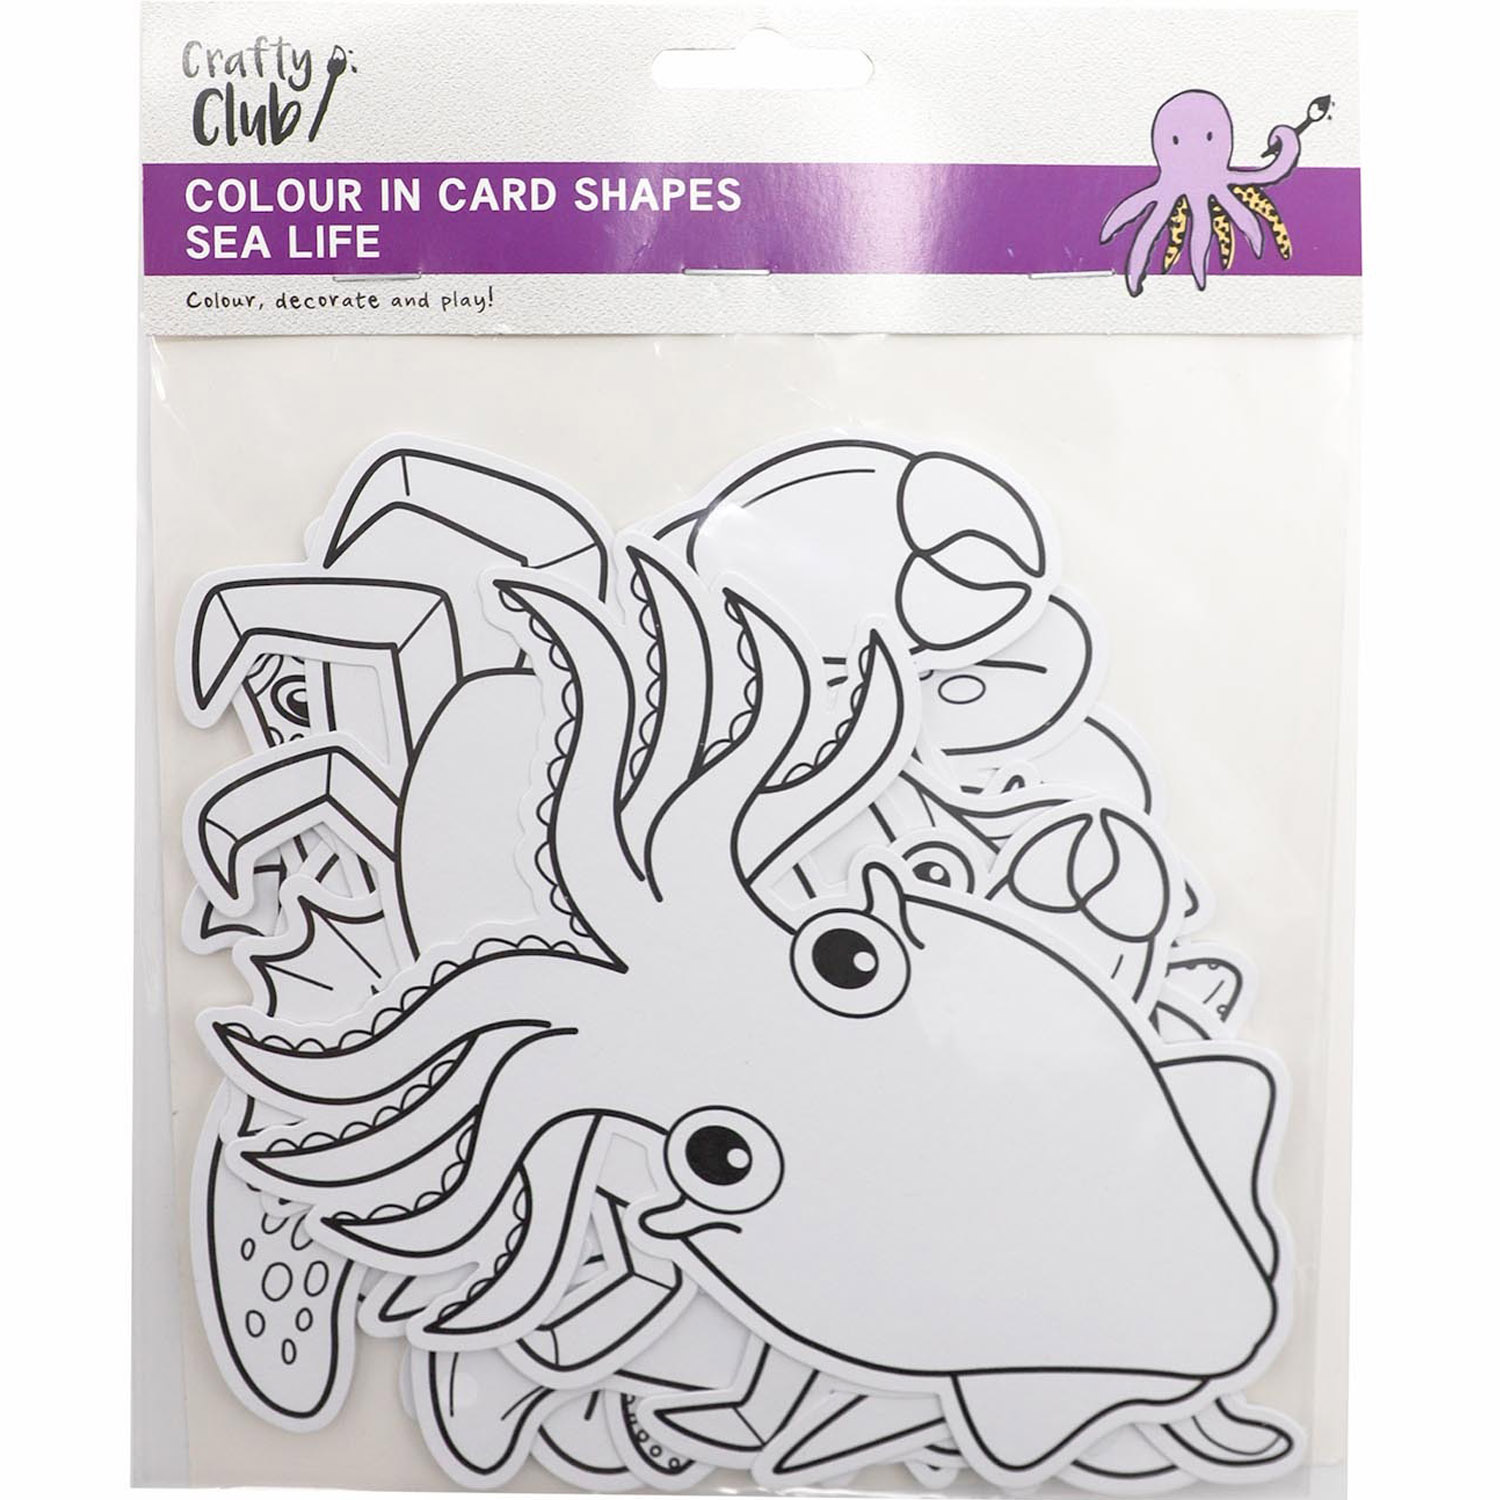 Pack of 12 Colour In Card Shapes - Sealife Image